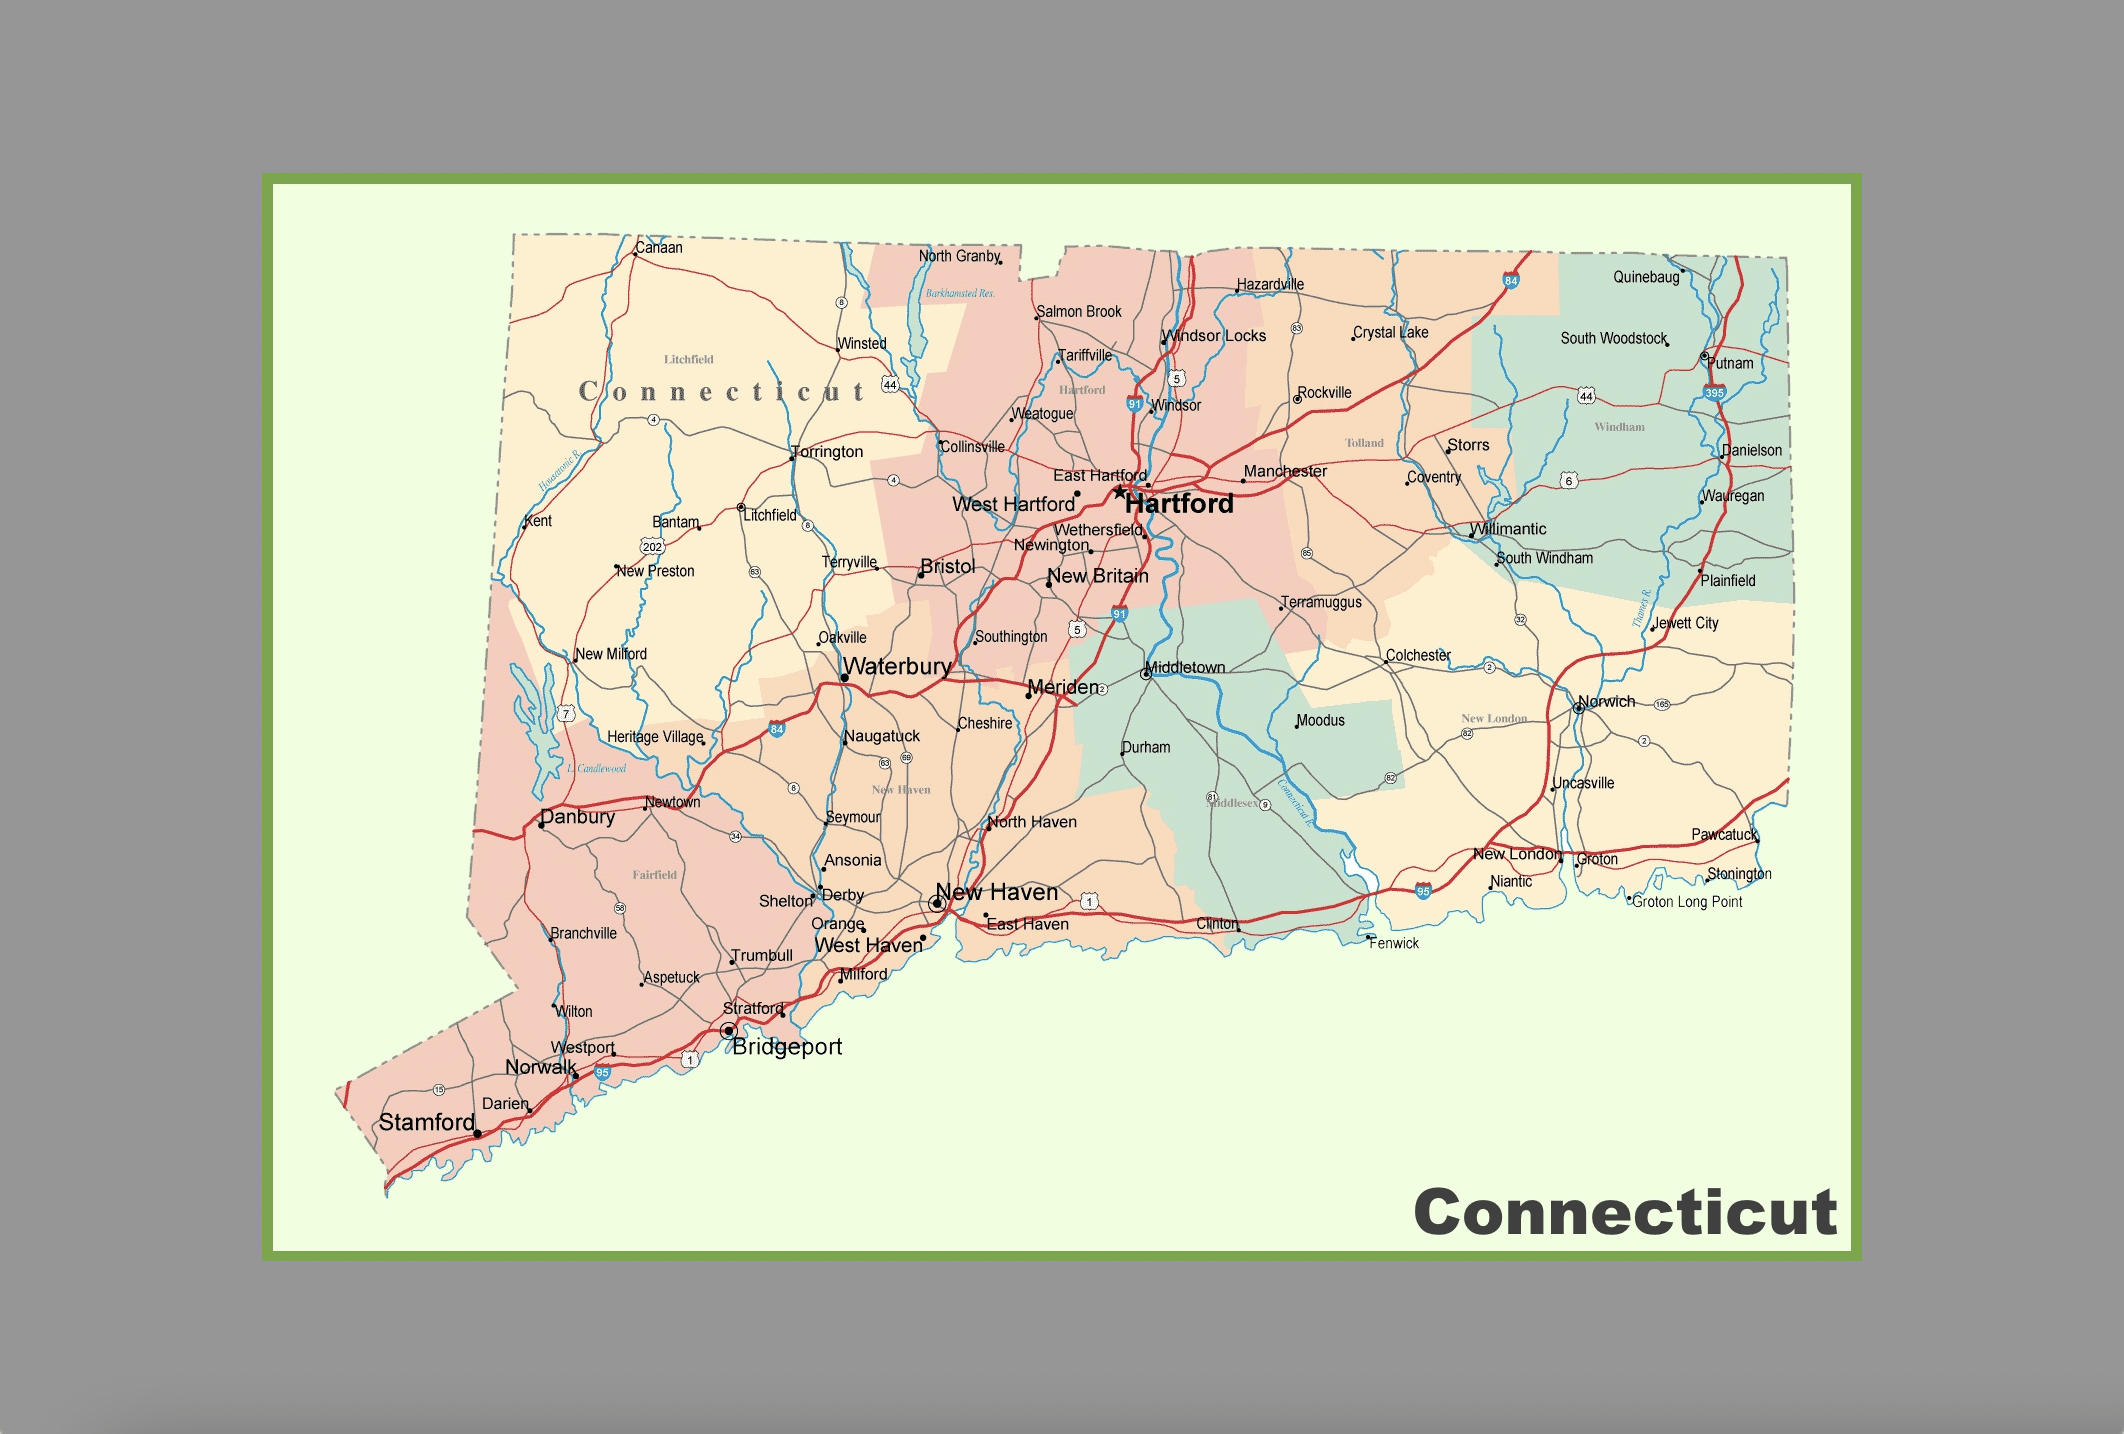 FLHC service map, showing the state of Connecticut